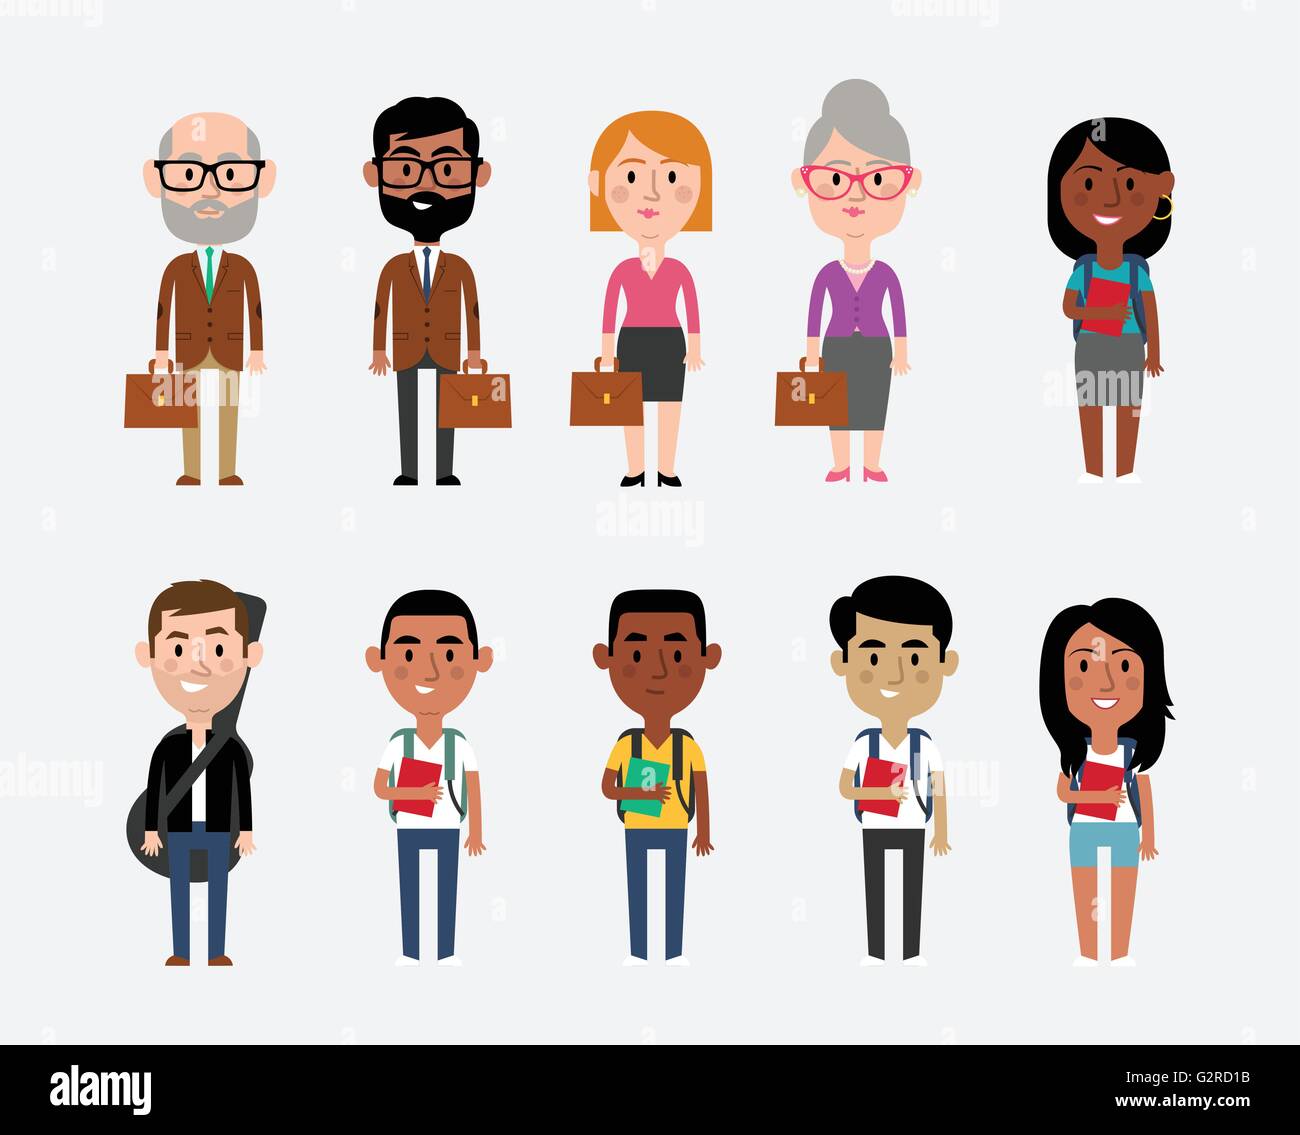 Character Illustrations Depicting Occupations In Education Stock Vector